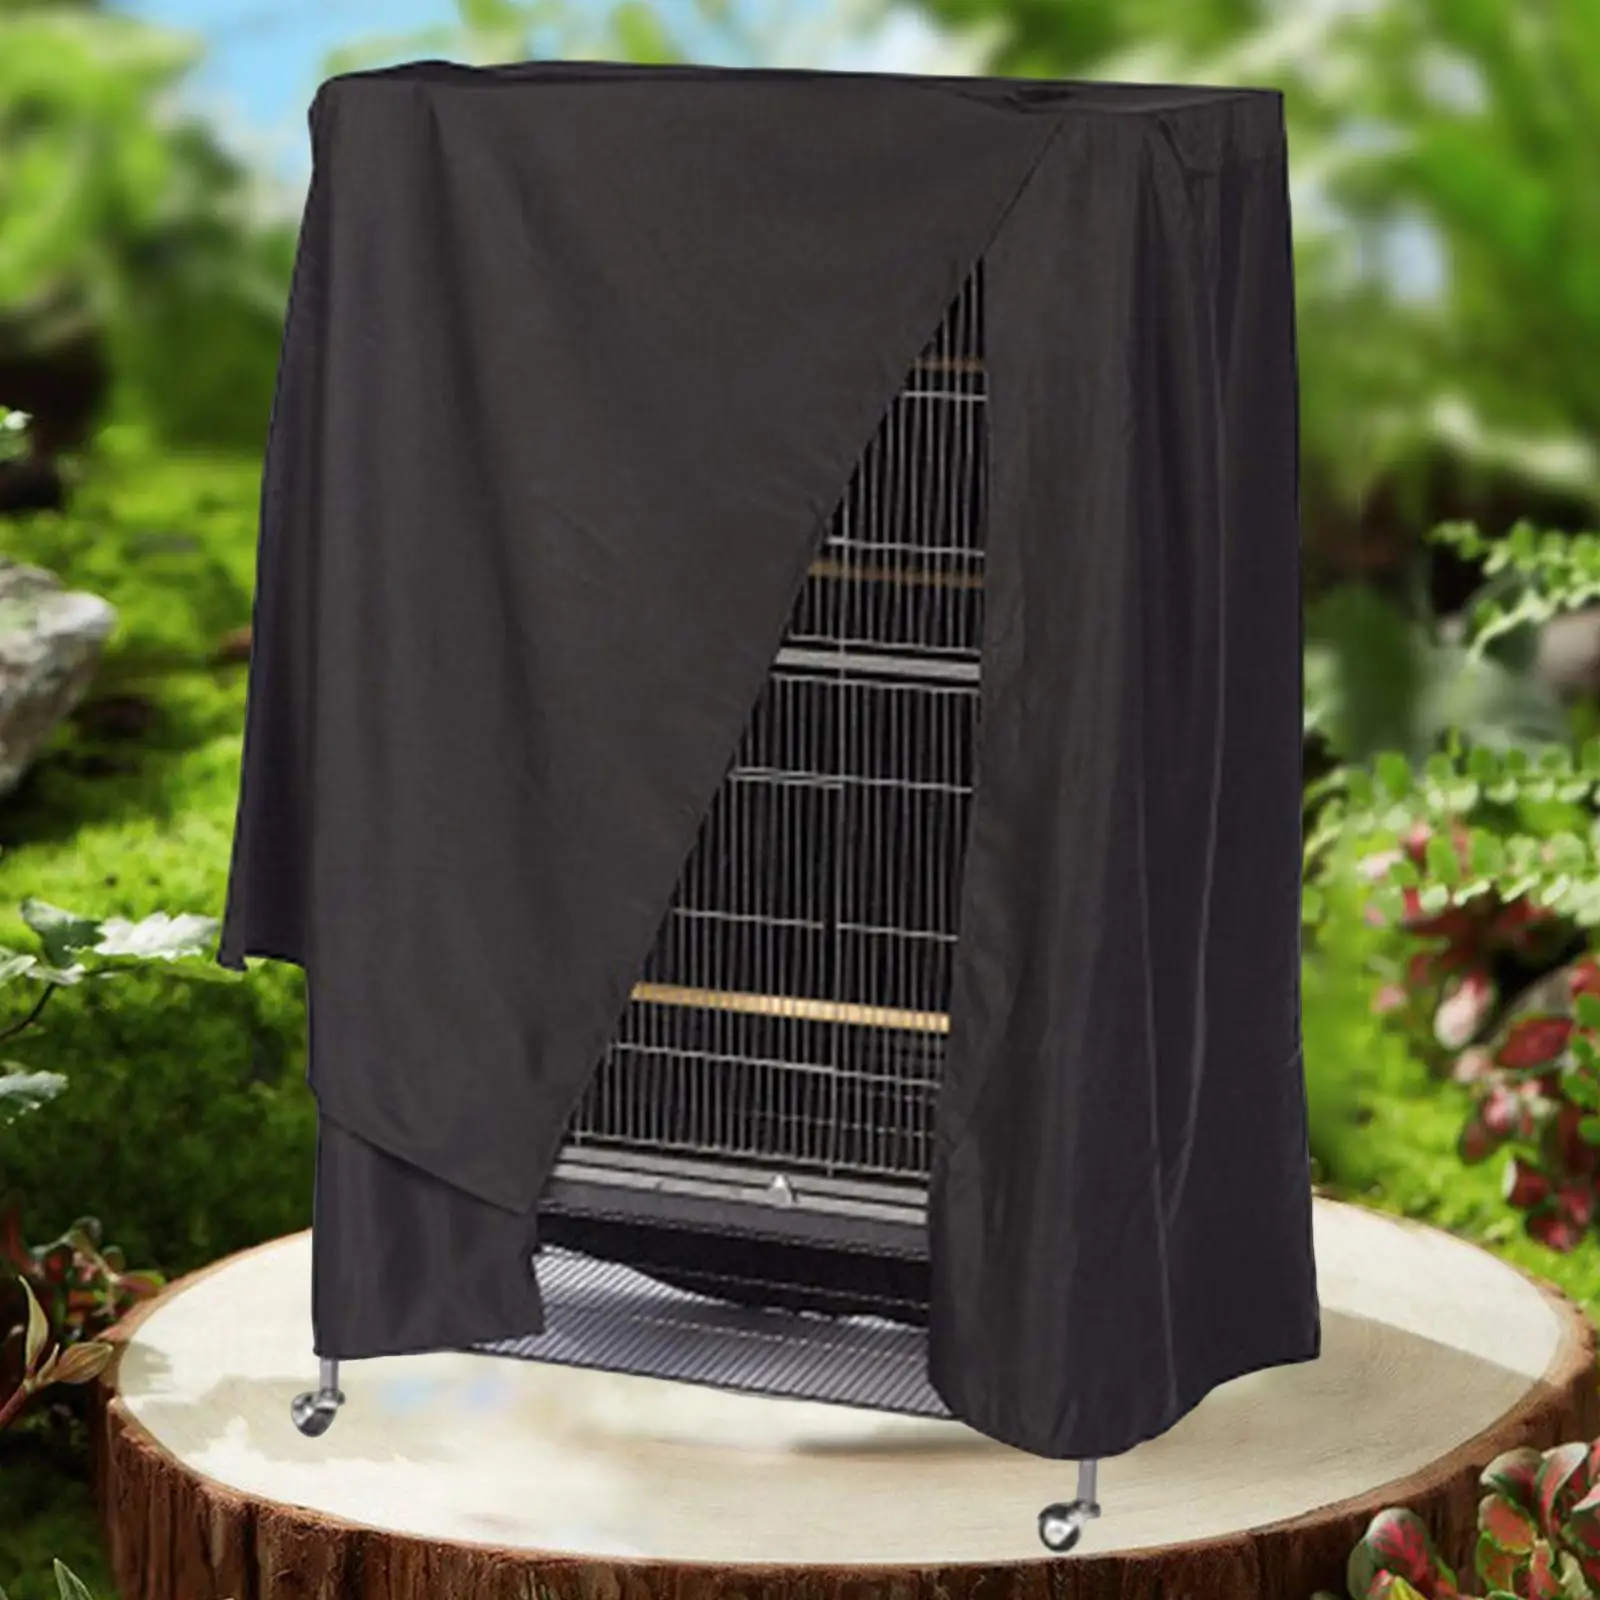 Bird Cage Cover Waterproof Dustproof Seed Catcher Cover Blackout Shade Cloth Night Supplies Privacy for Animal Cages Bird Cage